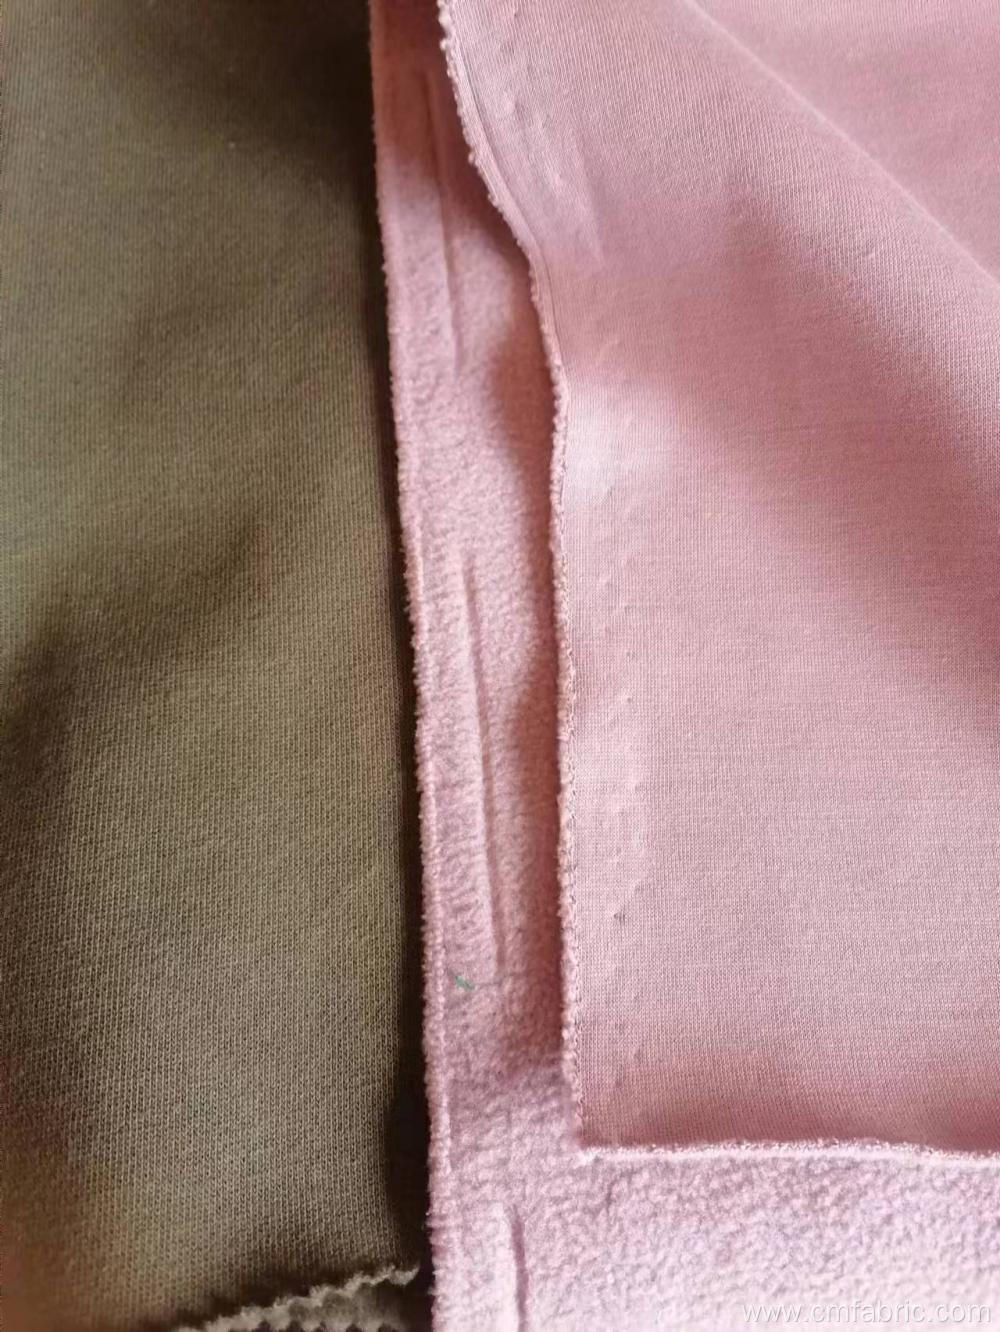 Cotton polyester knitted back brushed french terry fabric